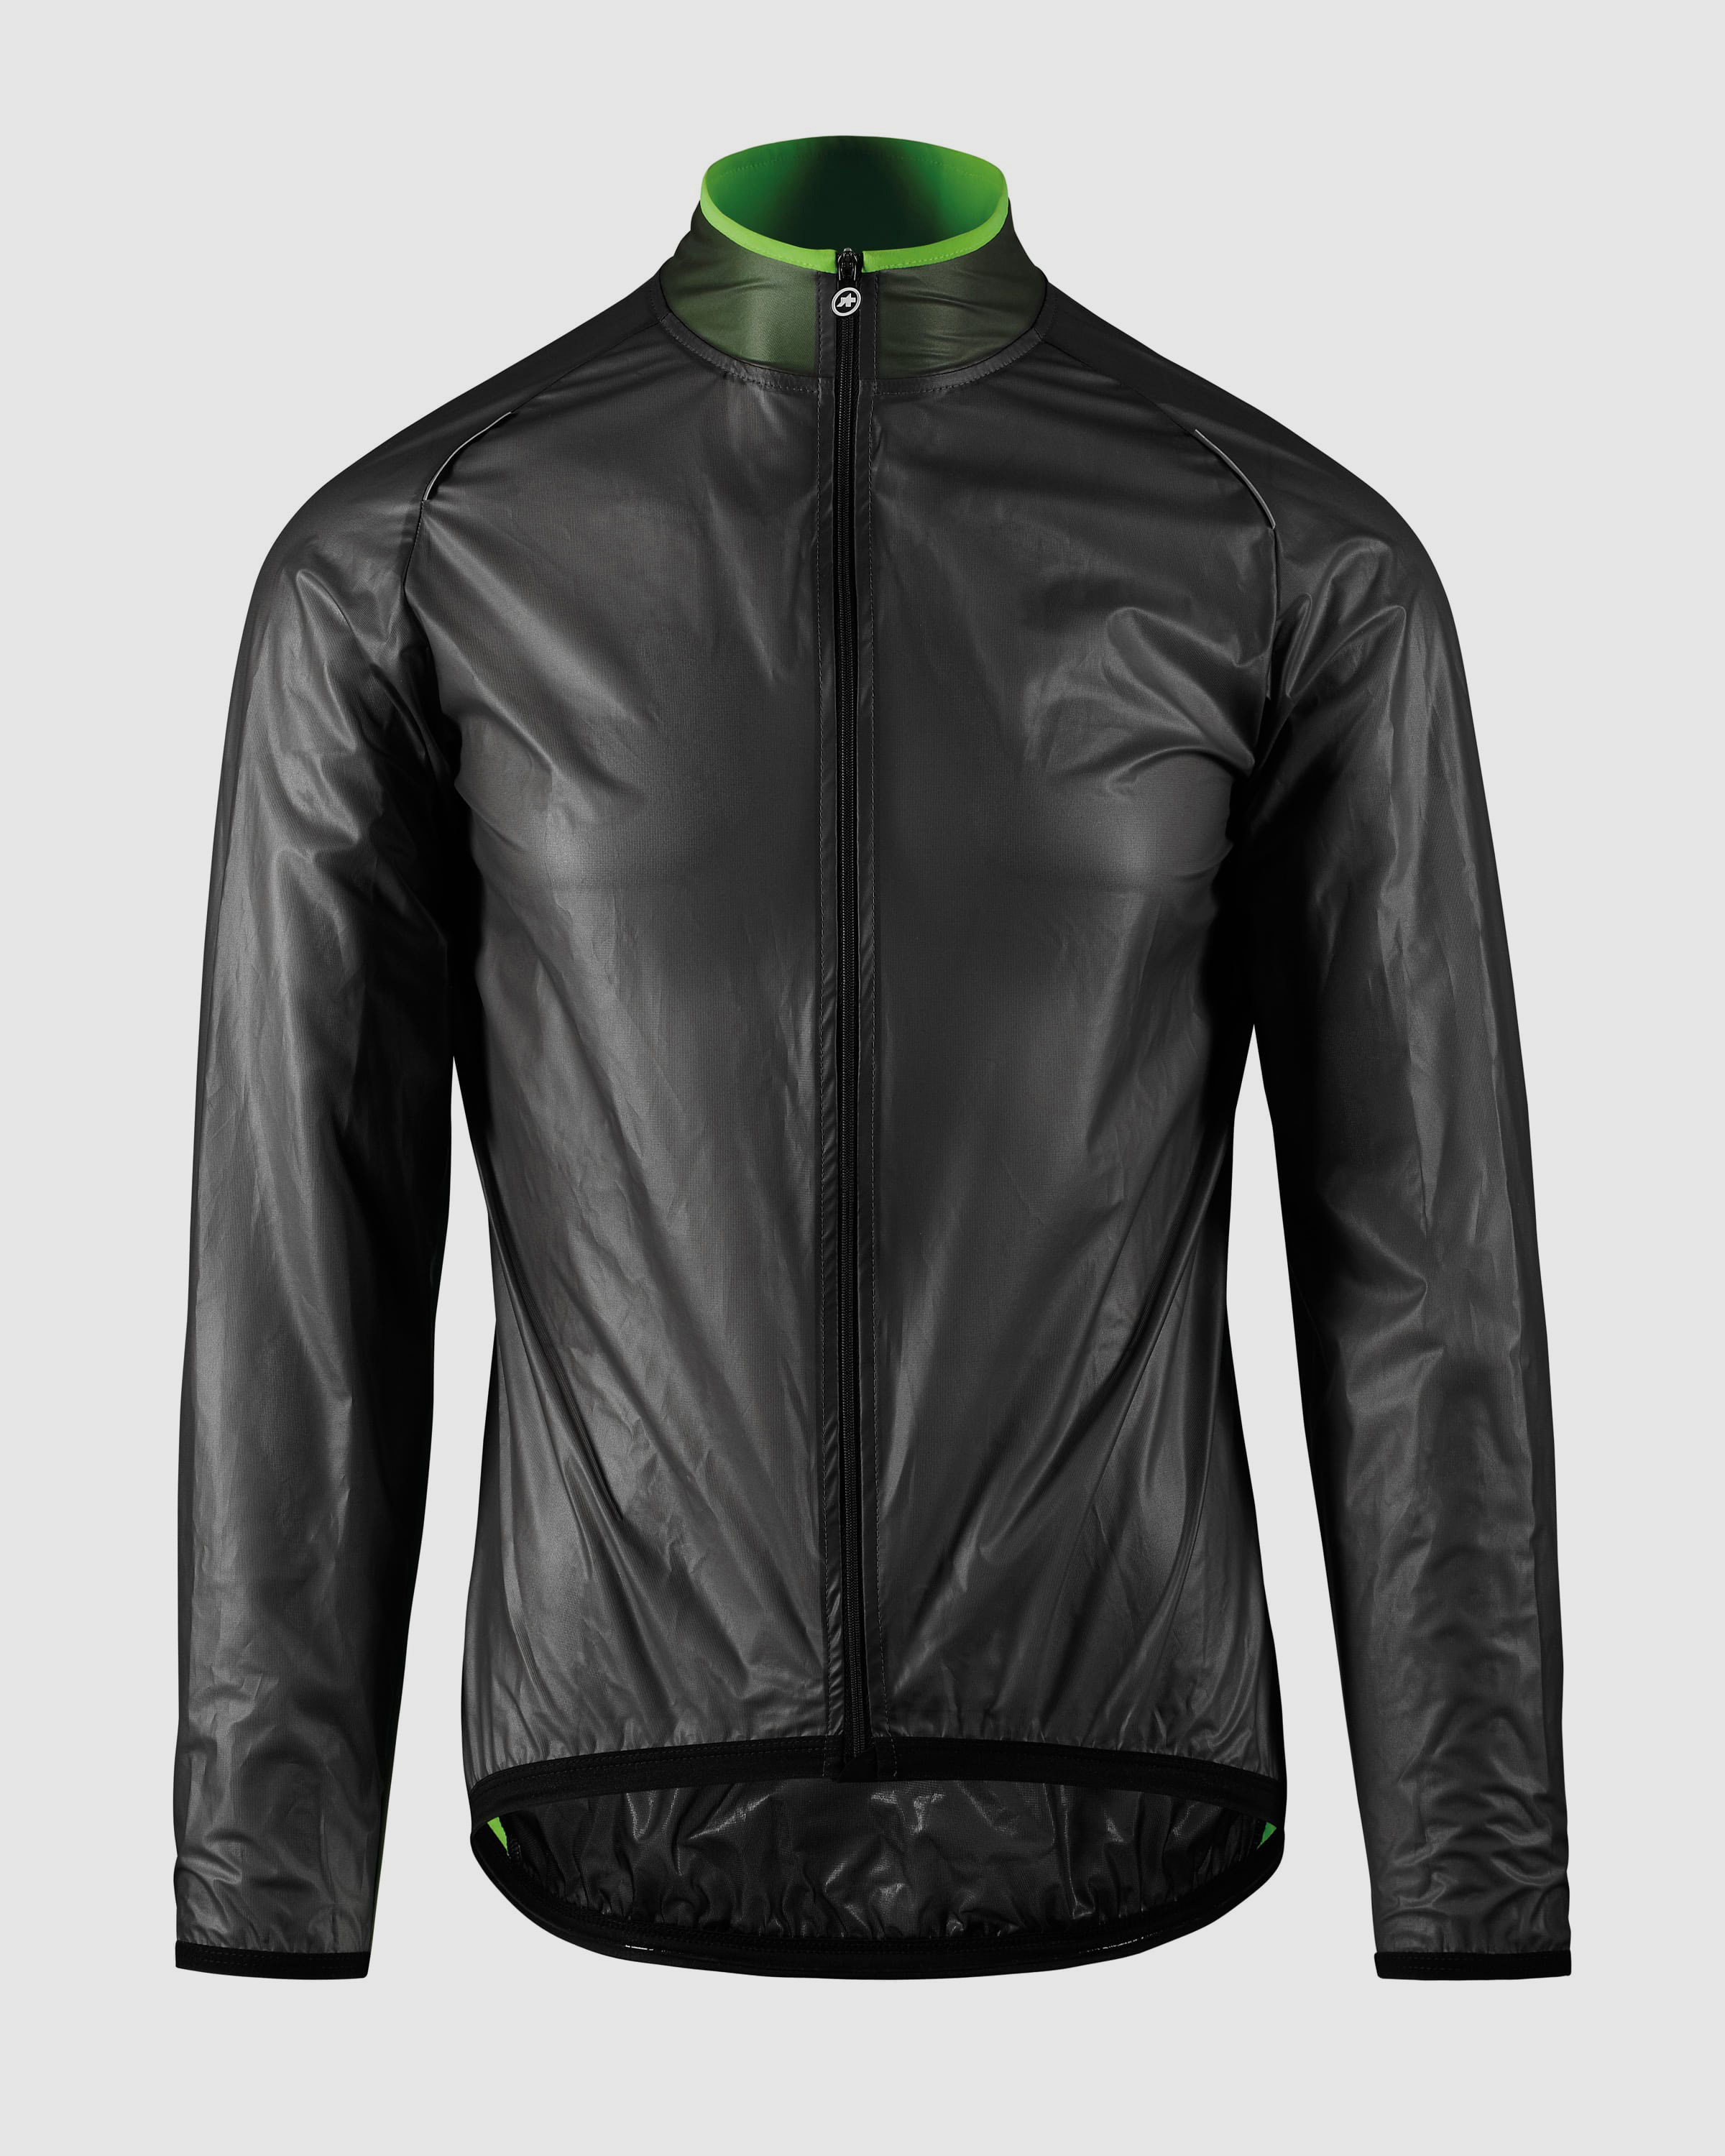 MILLE GT Clima Jacket - ASSOS Of Switzerland - Official Outlet